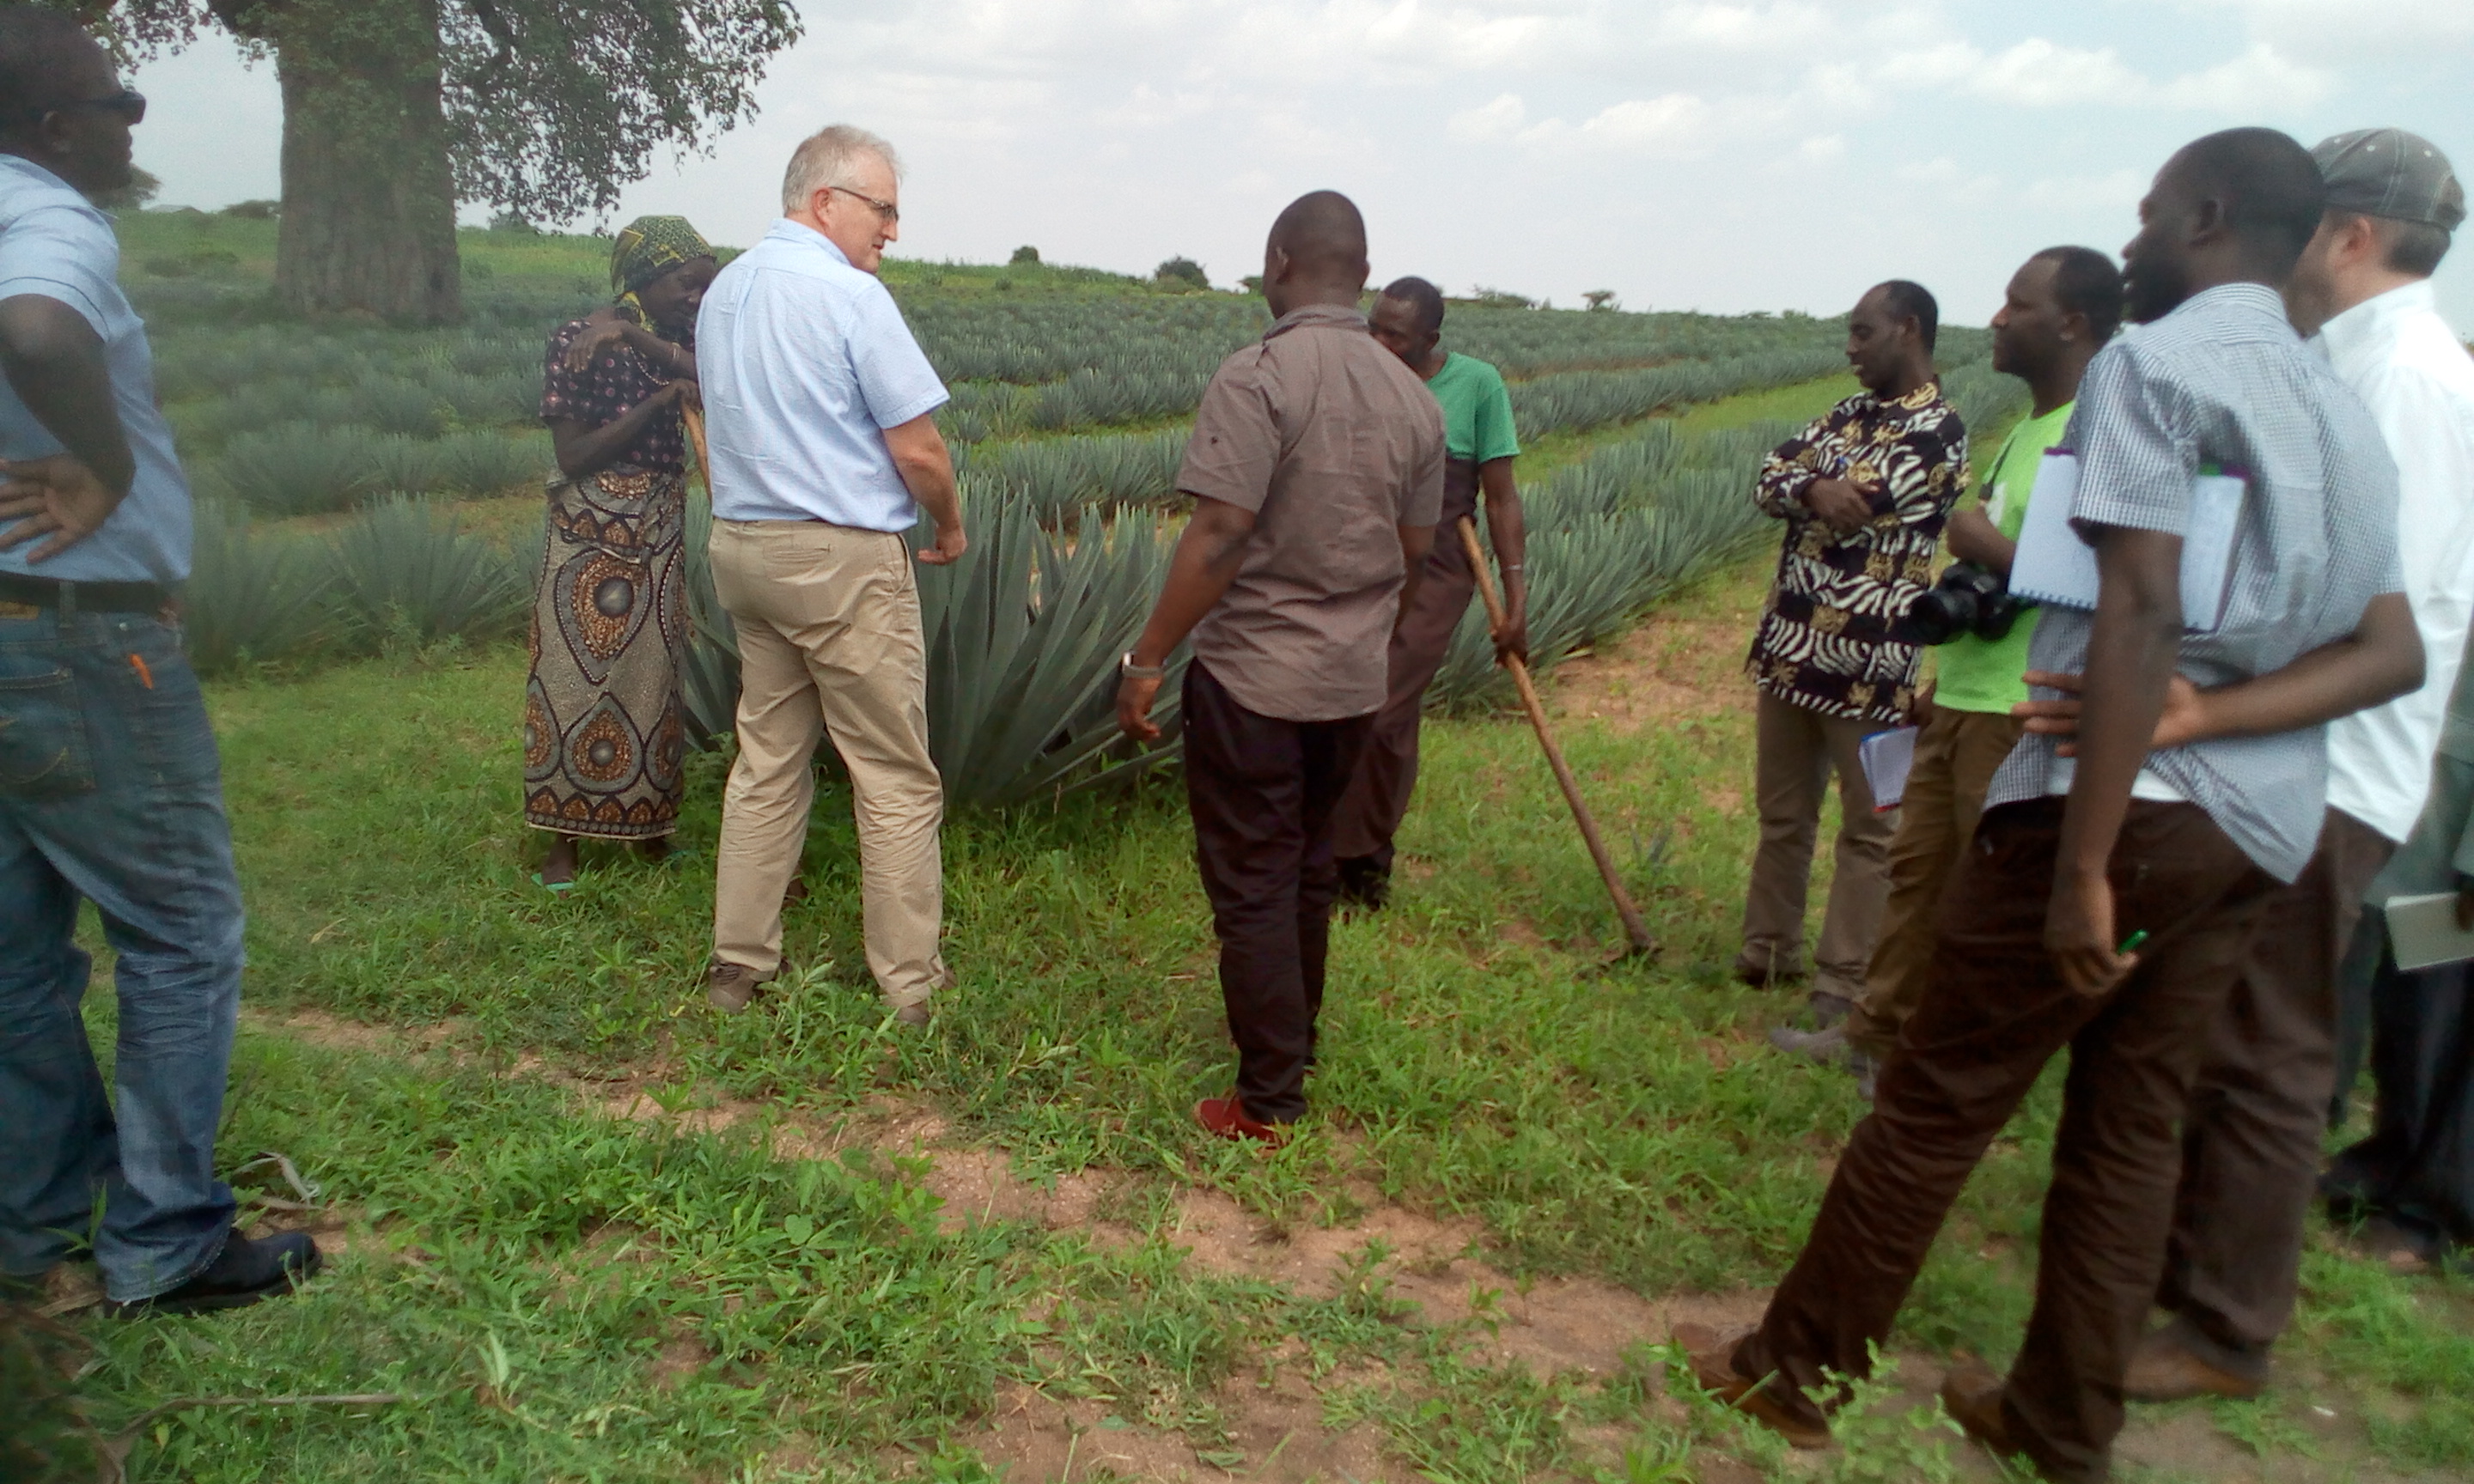 Mr. Nkinda Kulwa with REDESO Staff discussing on Sisal farming issues with OXFAM guests at Isoso Majengo village in Kishapu